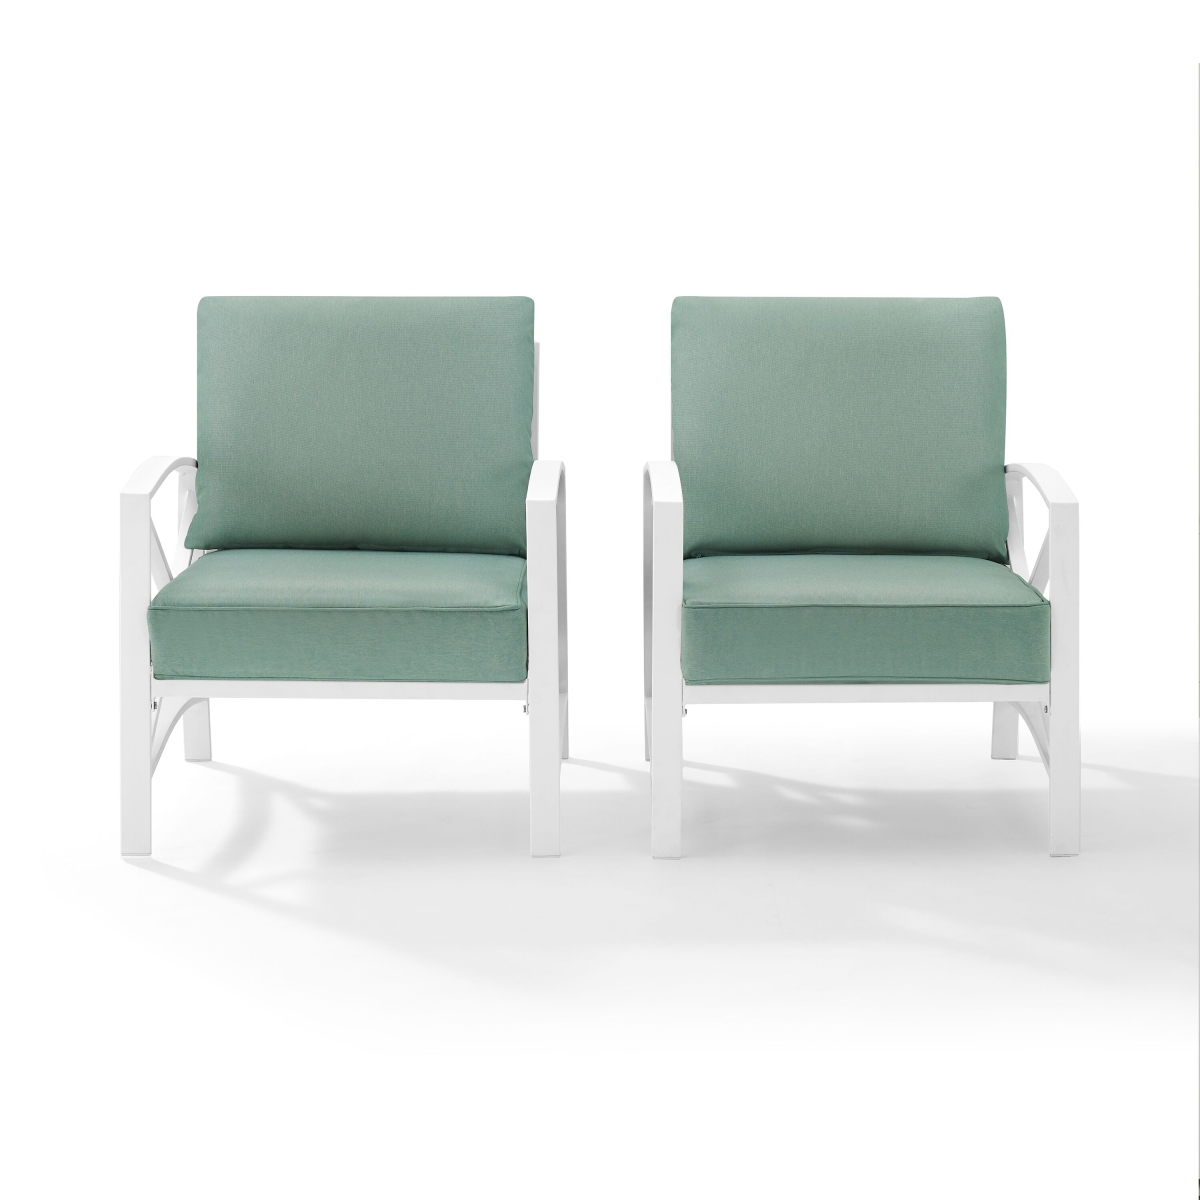 Ko60013wh-mi Kaplan 2-piece Outdoor Seating Set In White With Mist Cushions